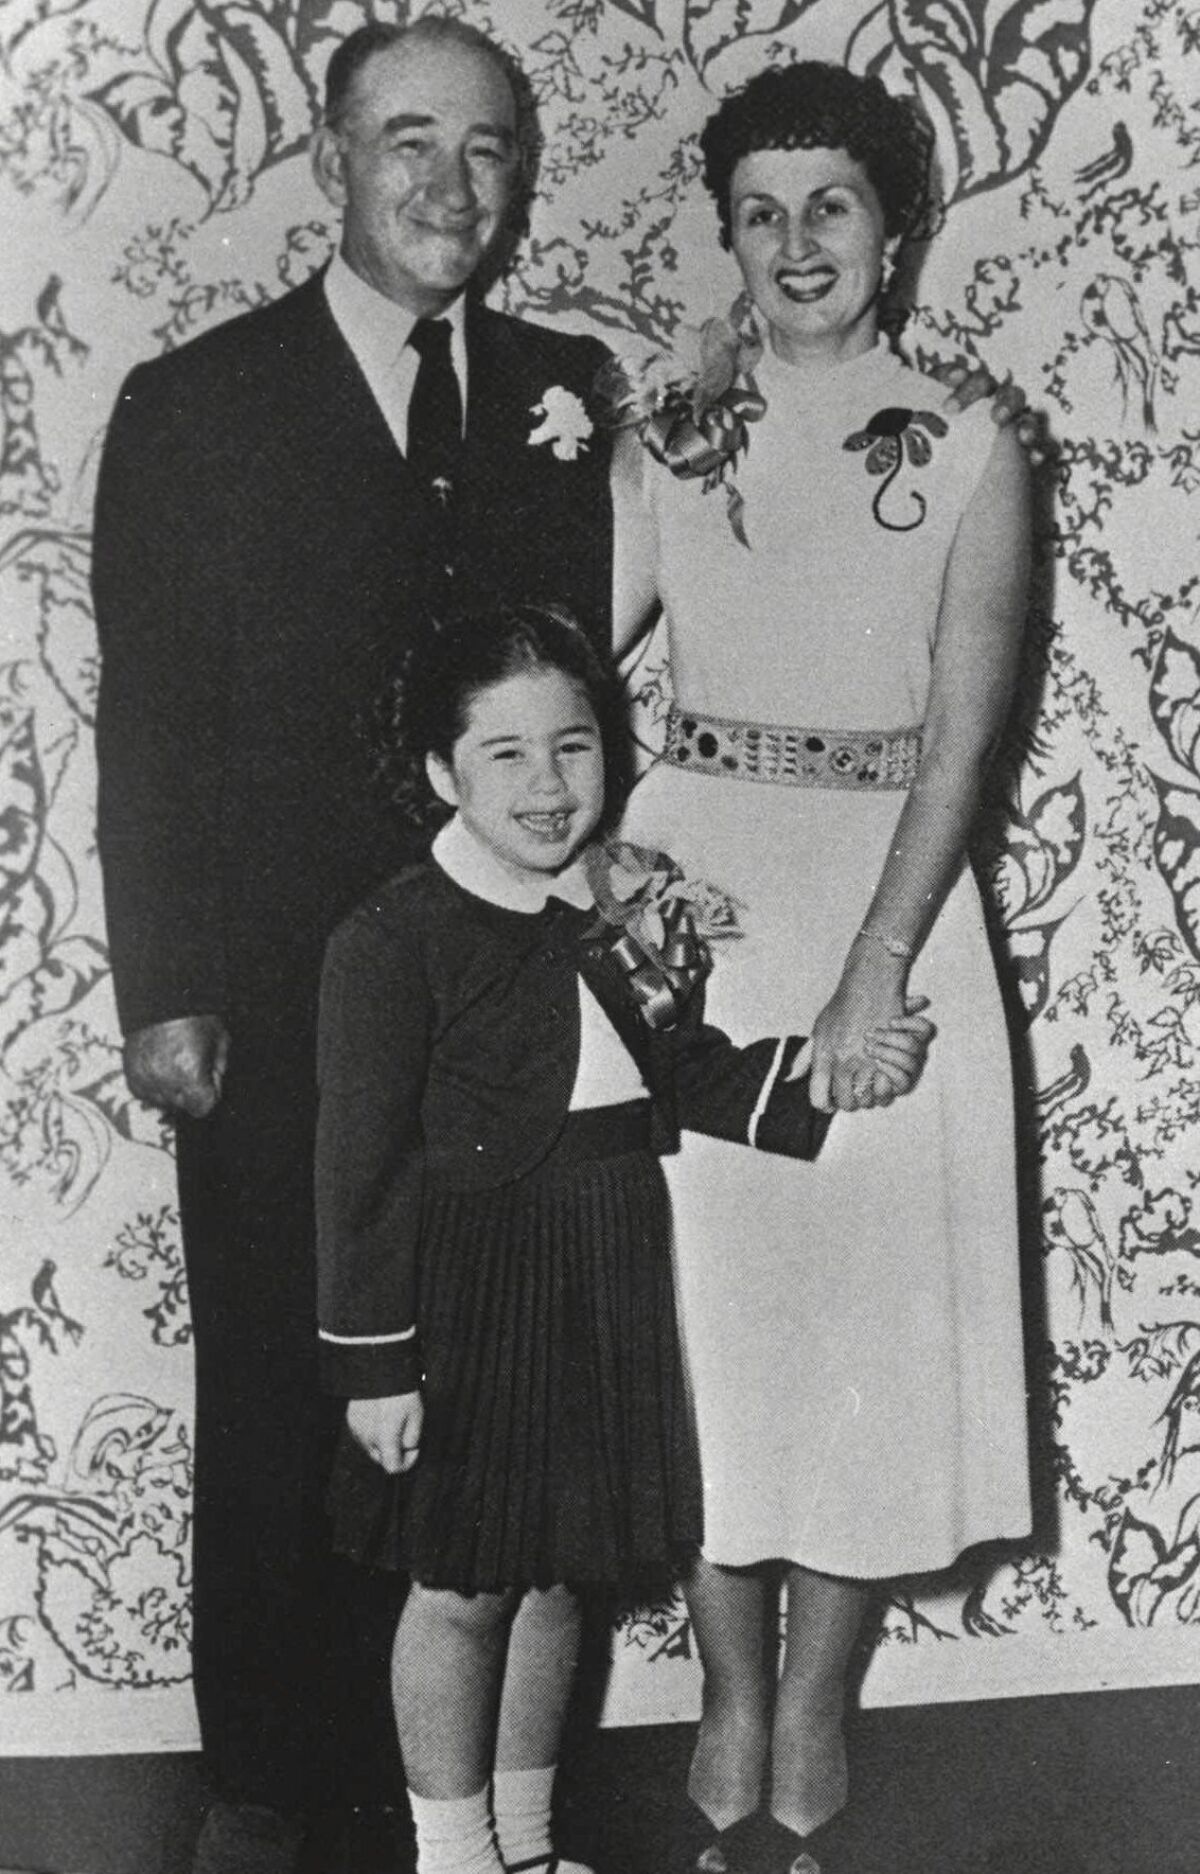 A child stand in between her parents, holding her mother's hand.